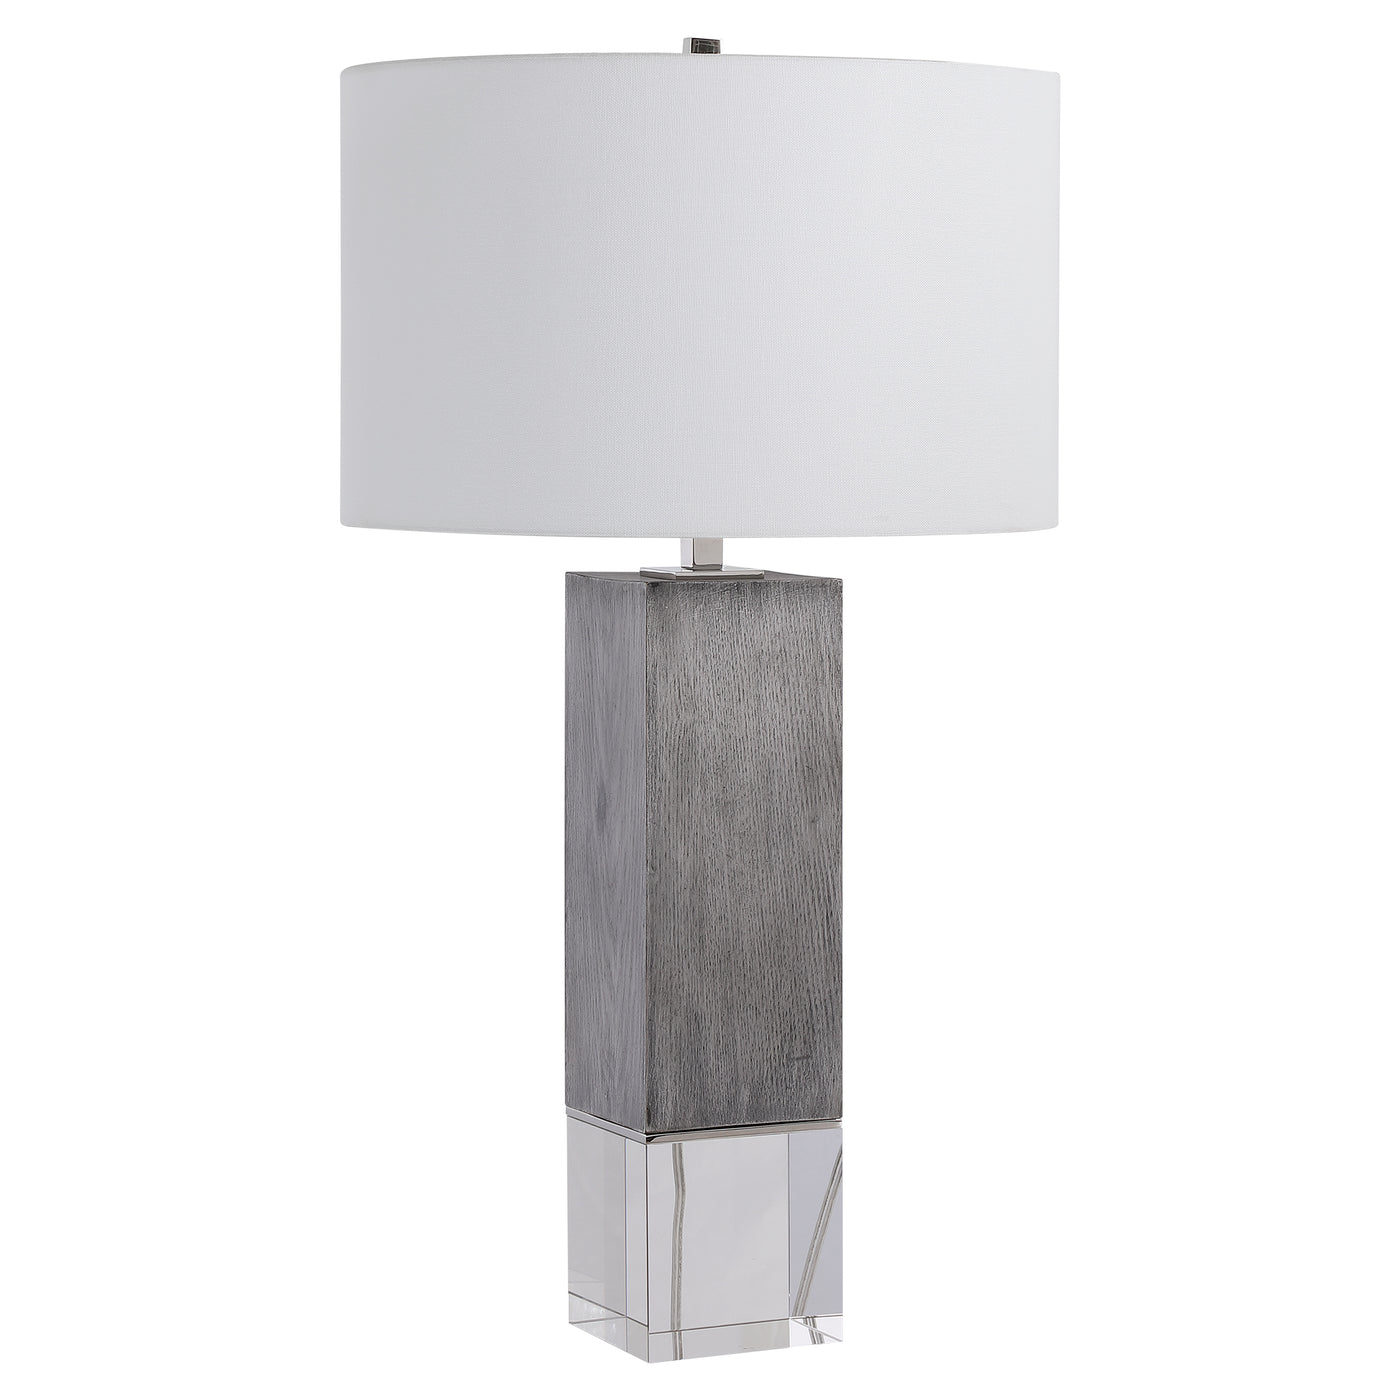 Inspired By Modern Lodge Style, This Table Lamp Features A Light Gray Oak Look, Accented By Polished Nickel Plated Details...